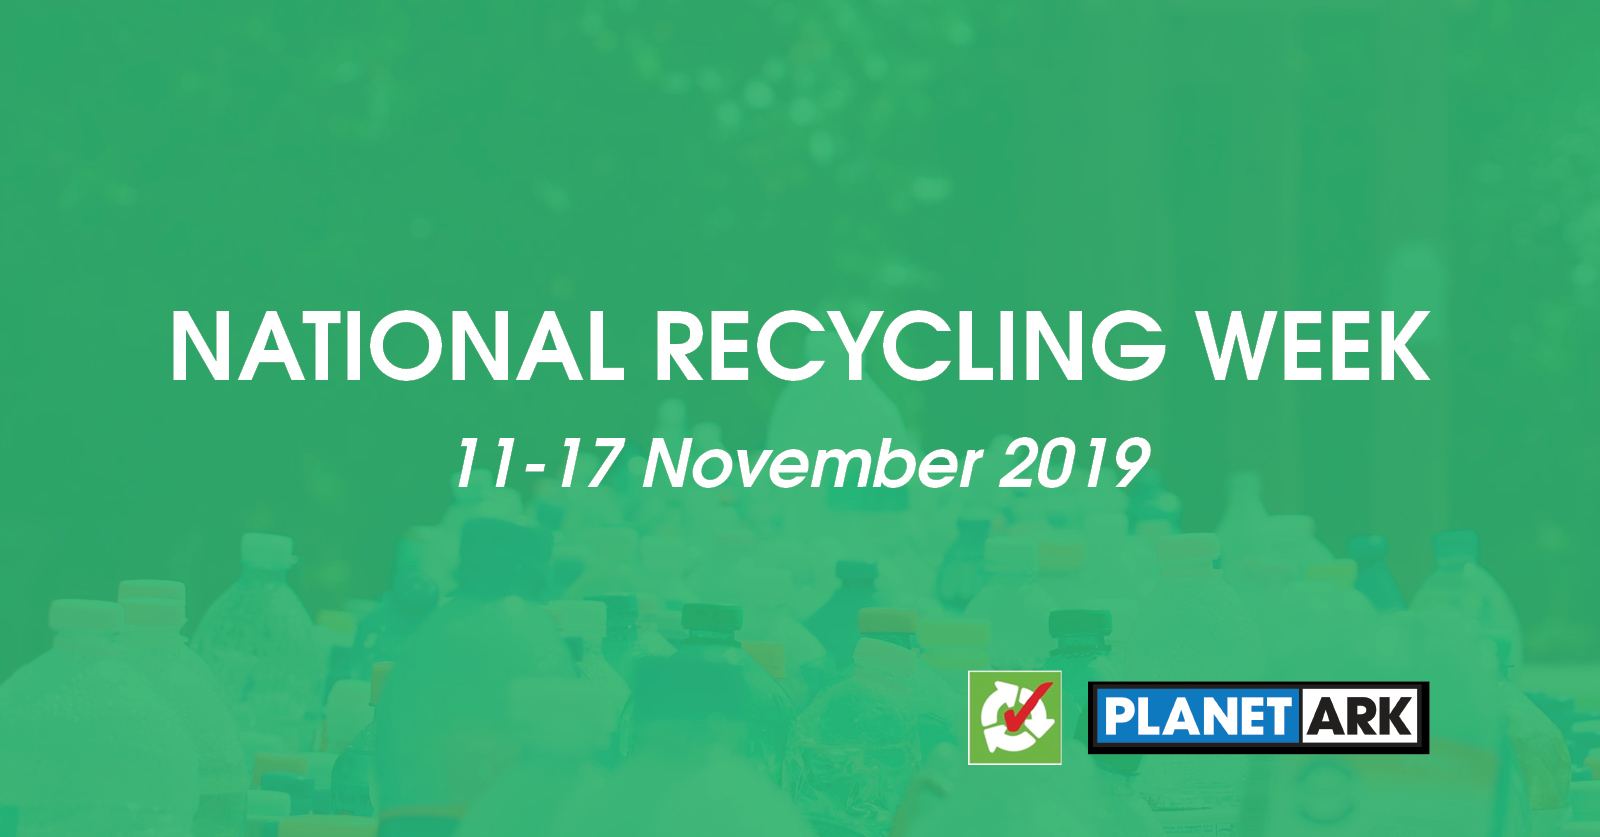 National Recycling Week 2019